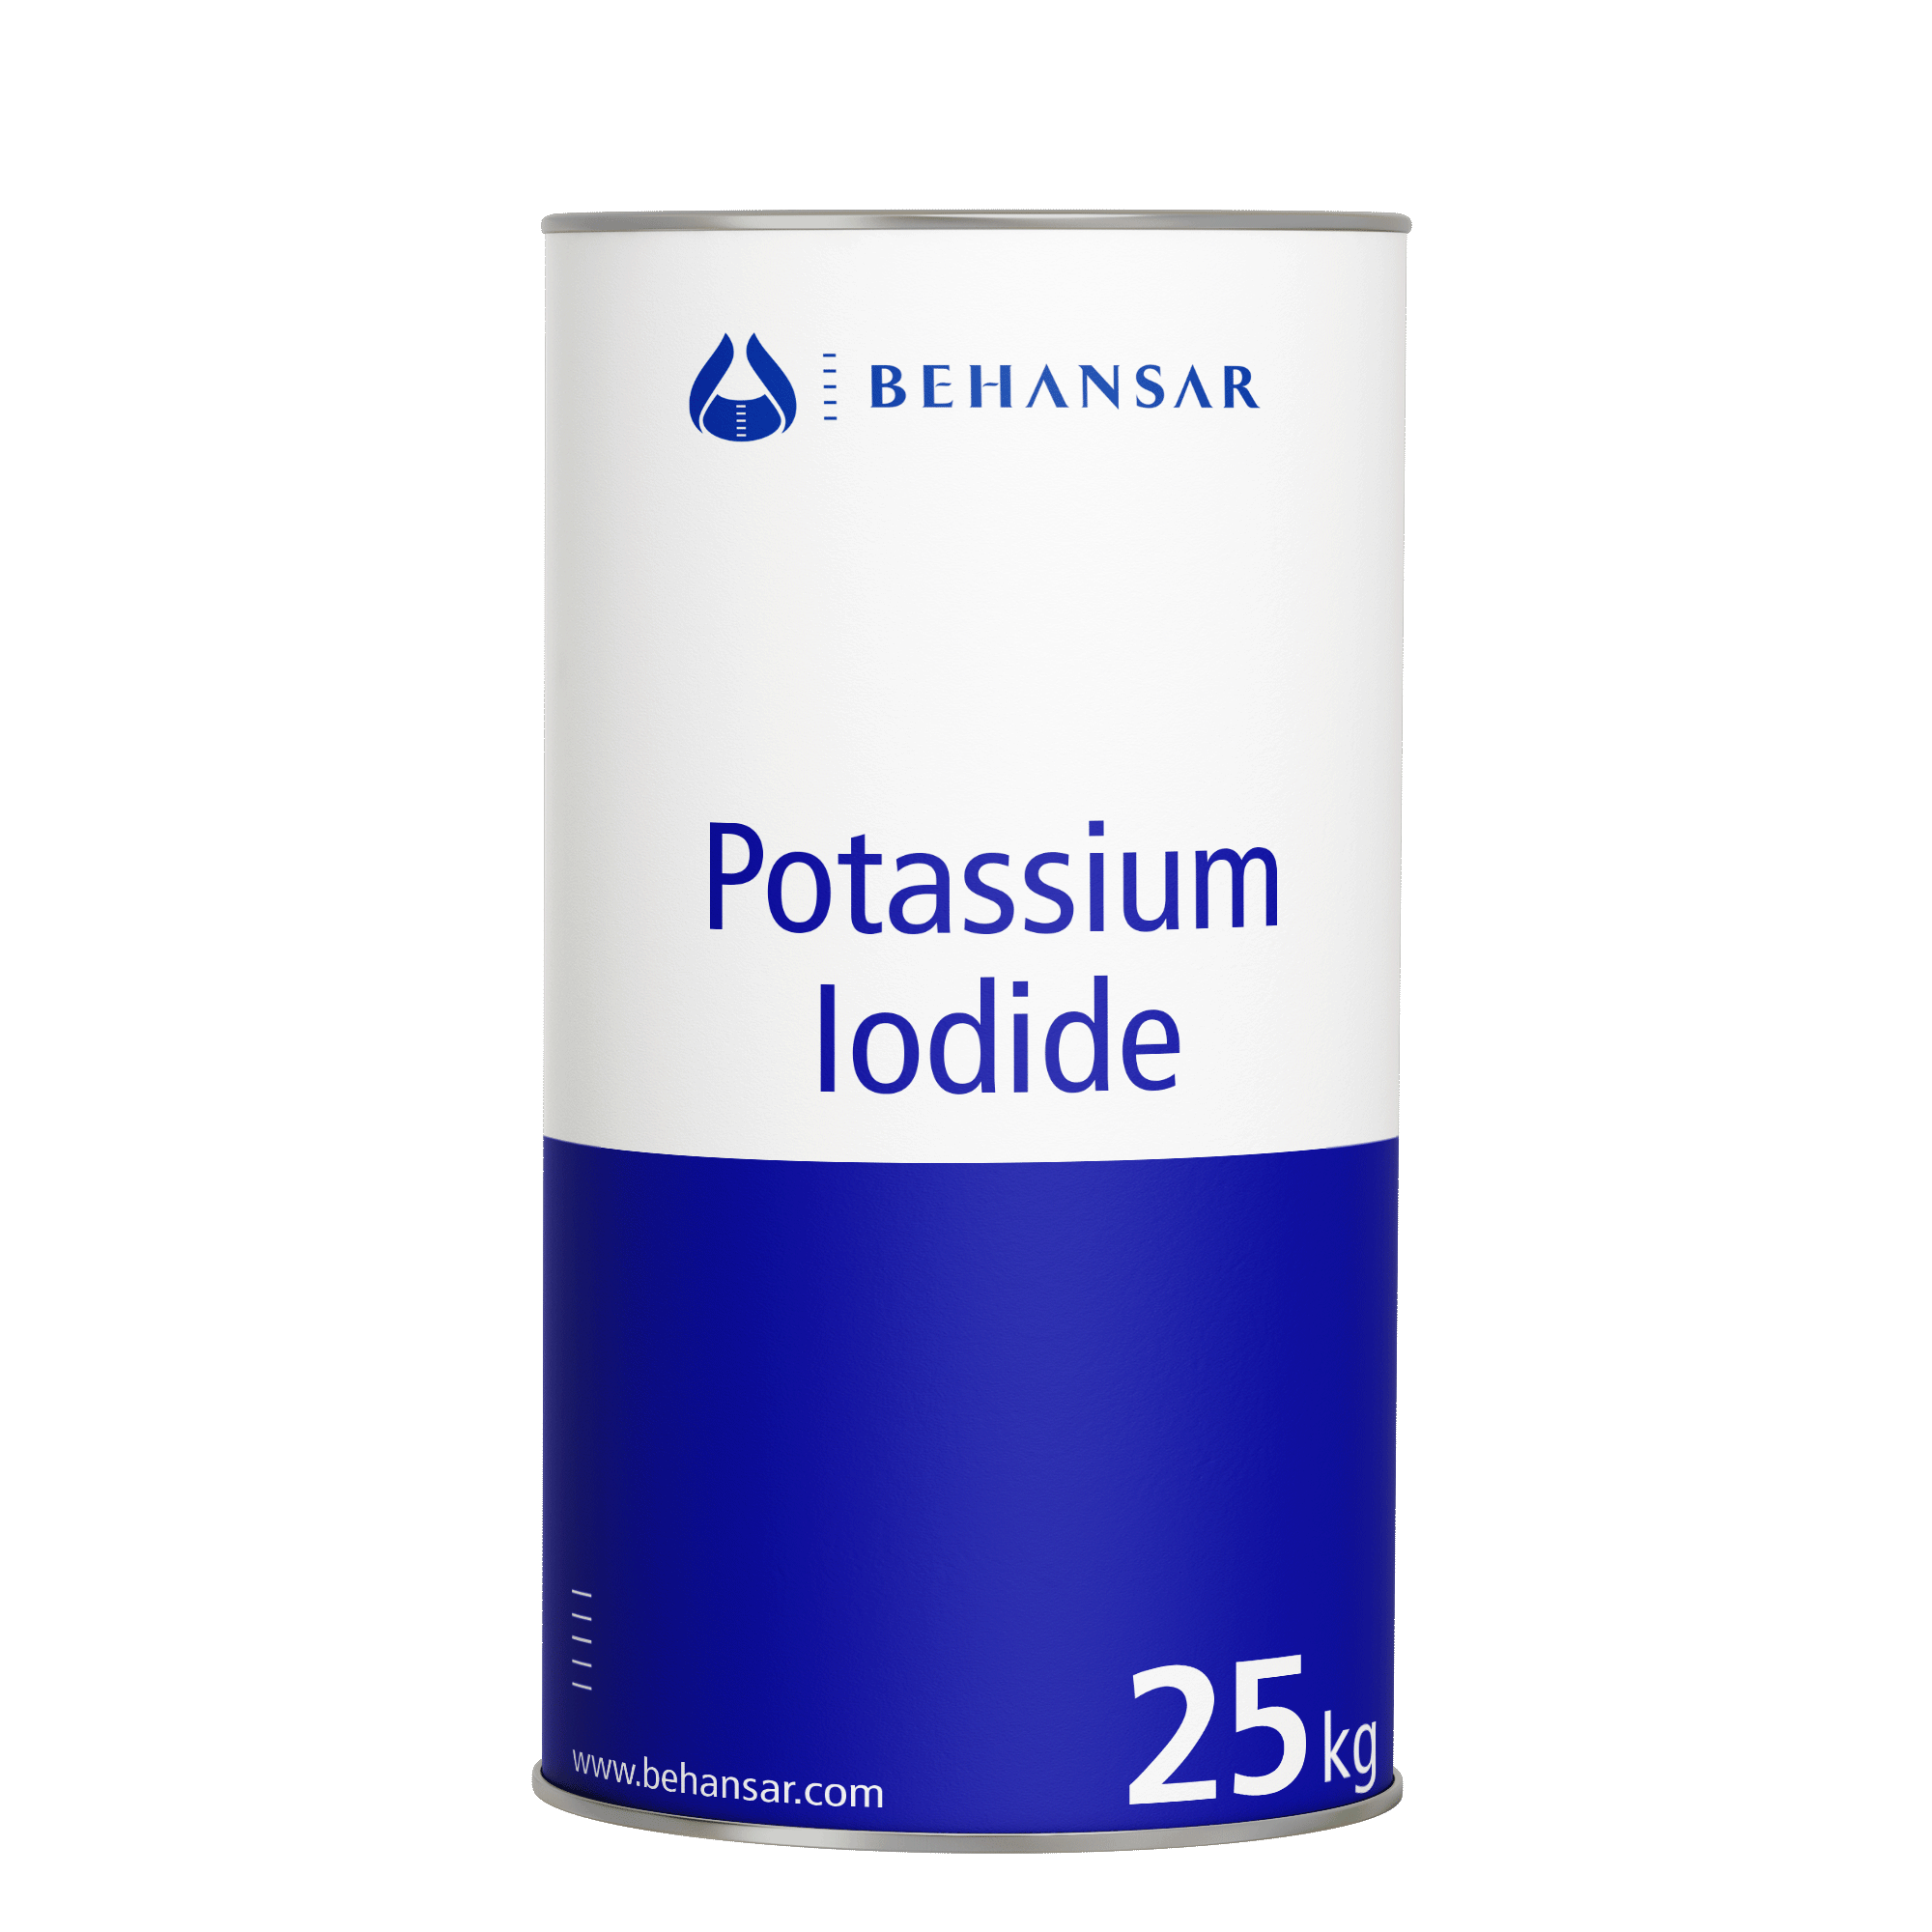 Potassium Iodide is one of the products of Behansar Co